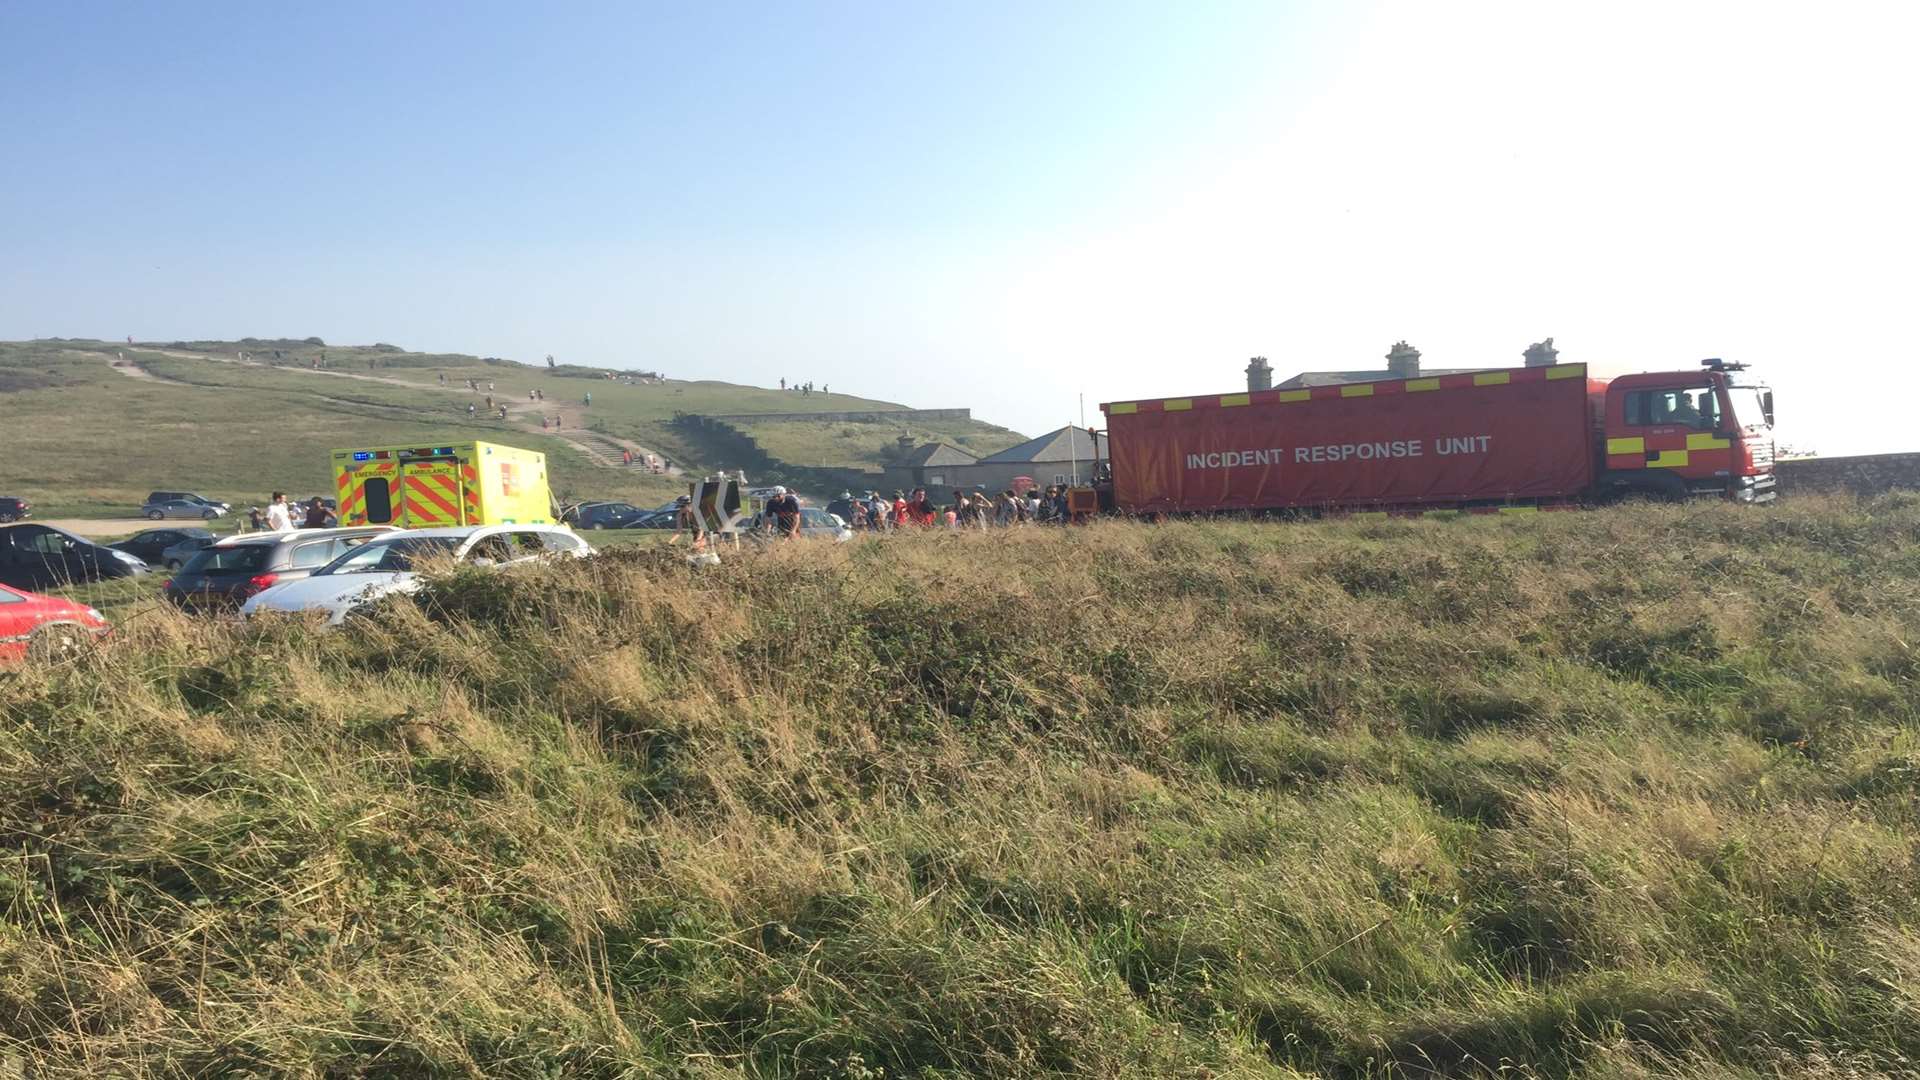 The area around Beachy Head had to be evacuated after a chemical haze swept in from the sea. Picture credit: Kyle Crickmore @Kyle_Crickmore